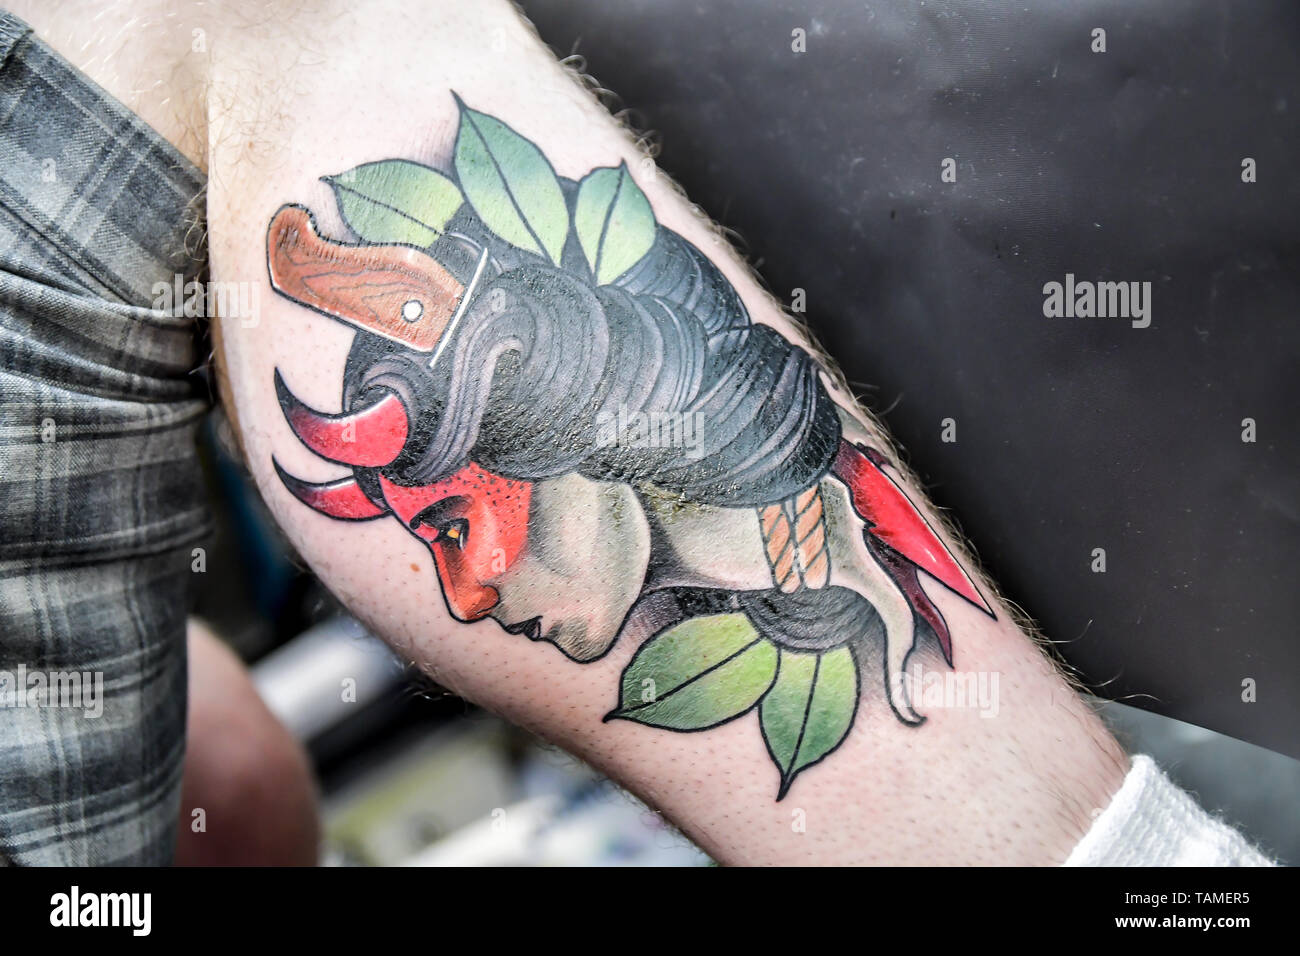 London, UK. 26th May, 2019. Matt Edwards TattooER, Tattoo a client at The Great British Tattoo Show, on 26 May 2019, London, UK. Credit: Picture Capital/Alamy Live News Stock Photo